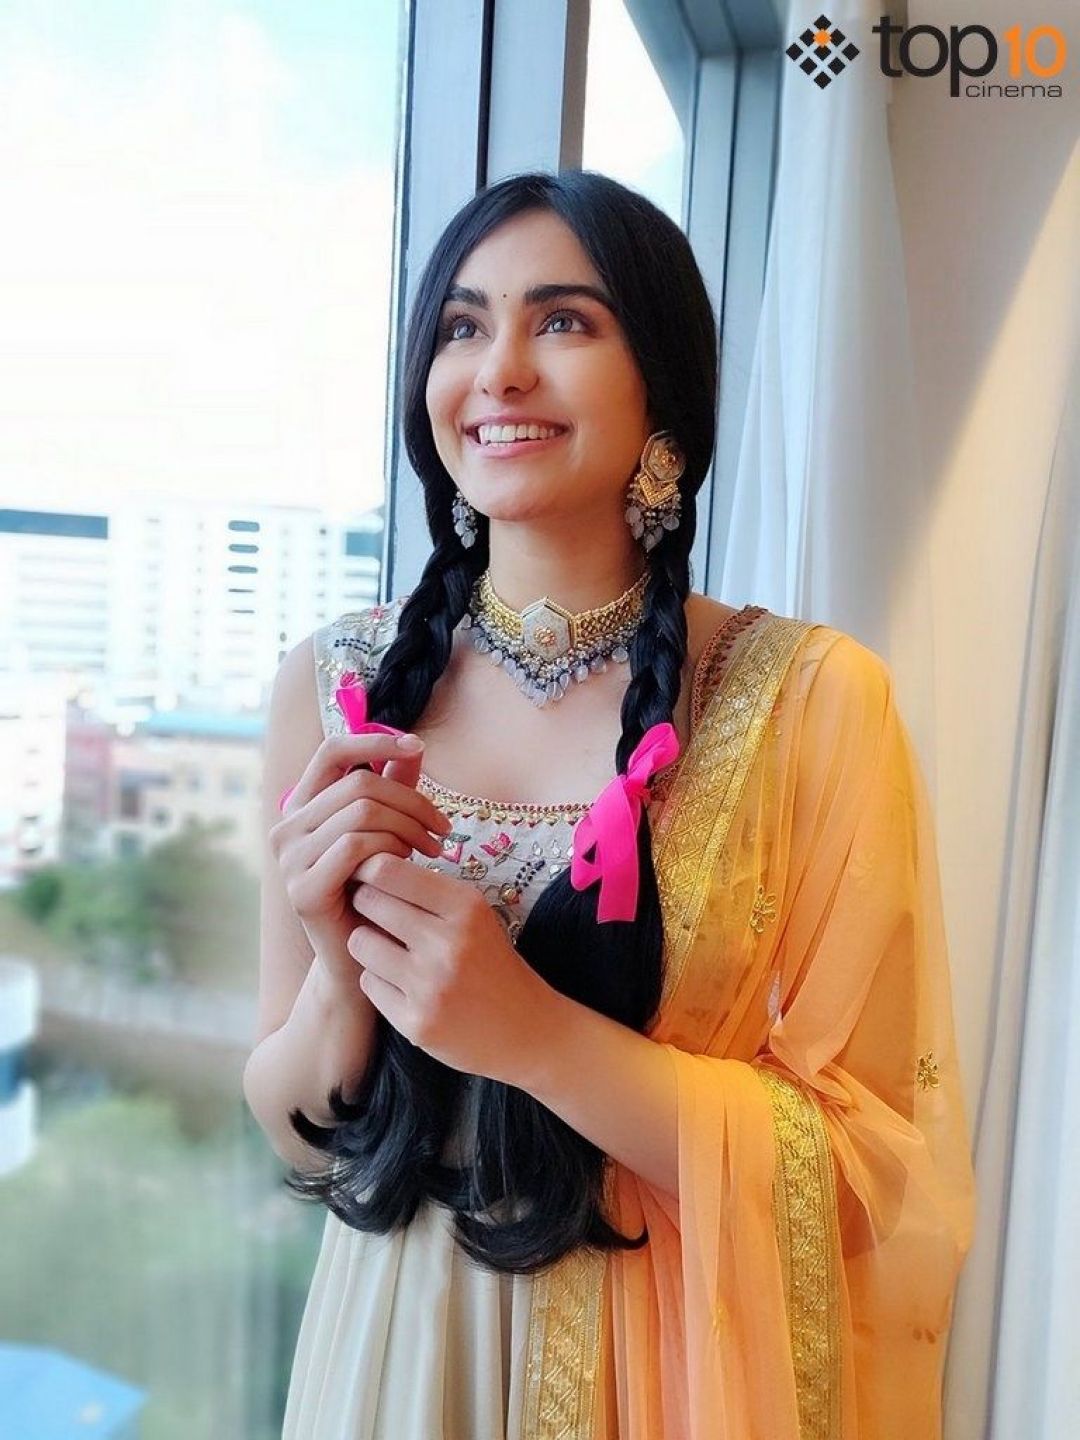 ✓[115+] Actress Adah Sharma Photo - Top 10 Cinema - Android / iPhone HD  Wallpaper Background Download (png / jpg) (2023)